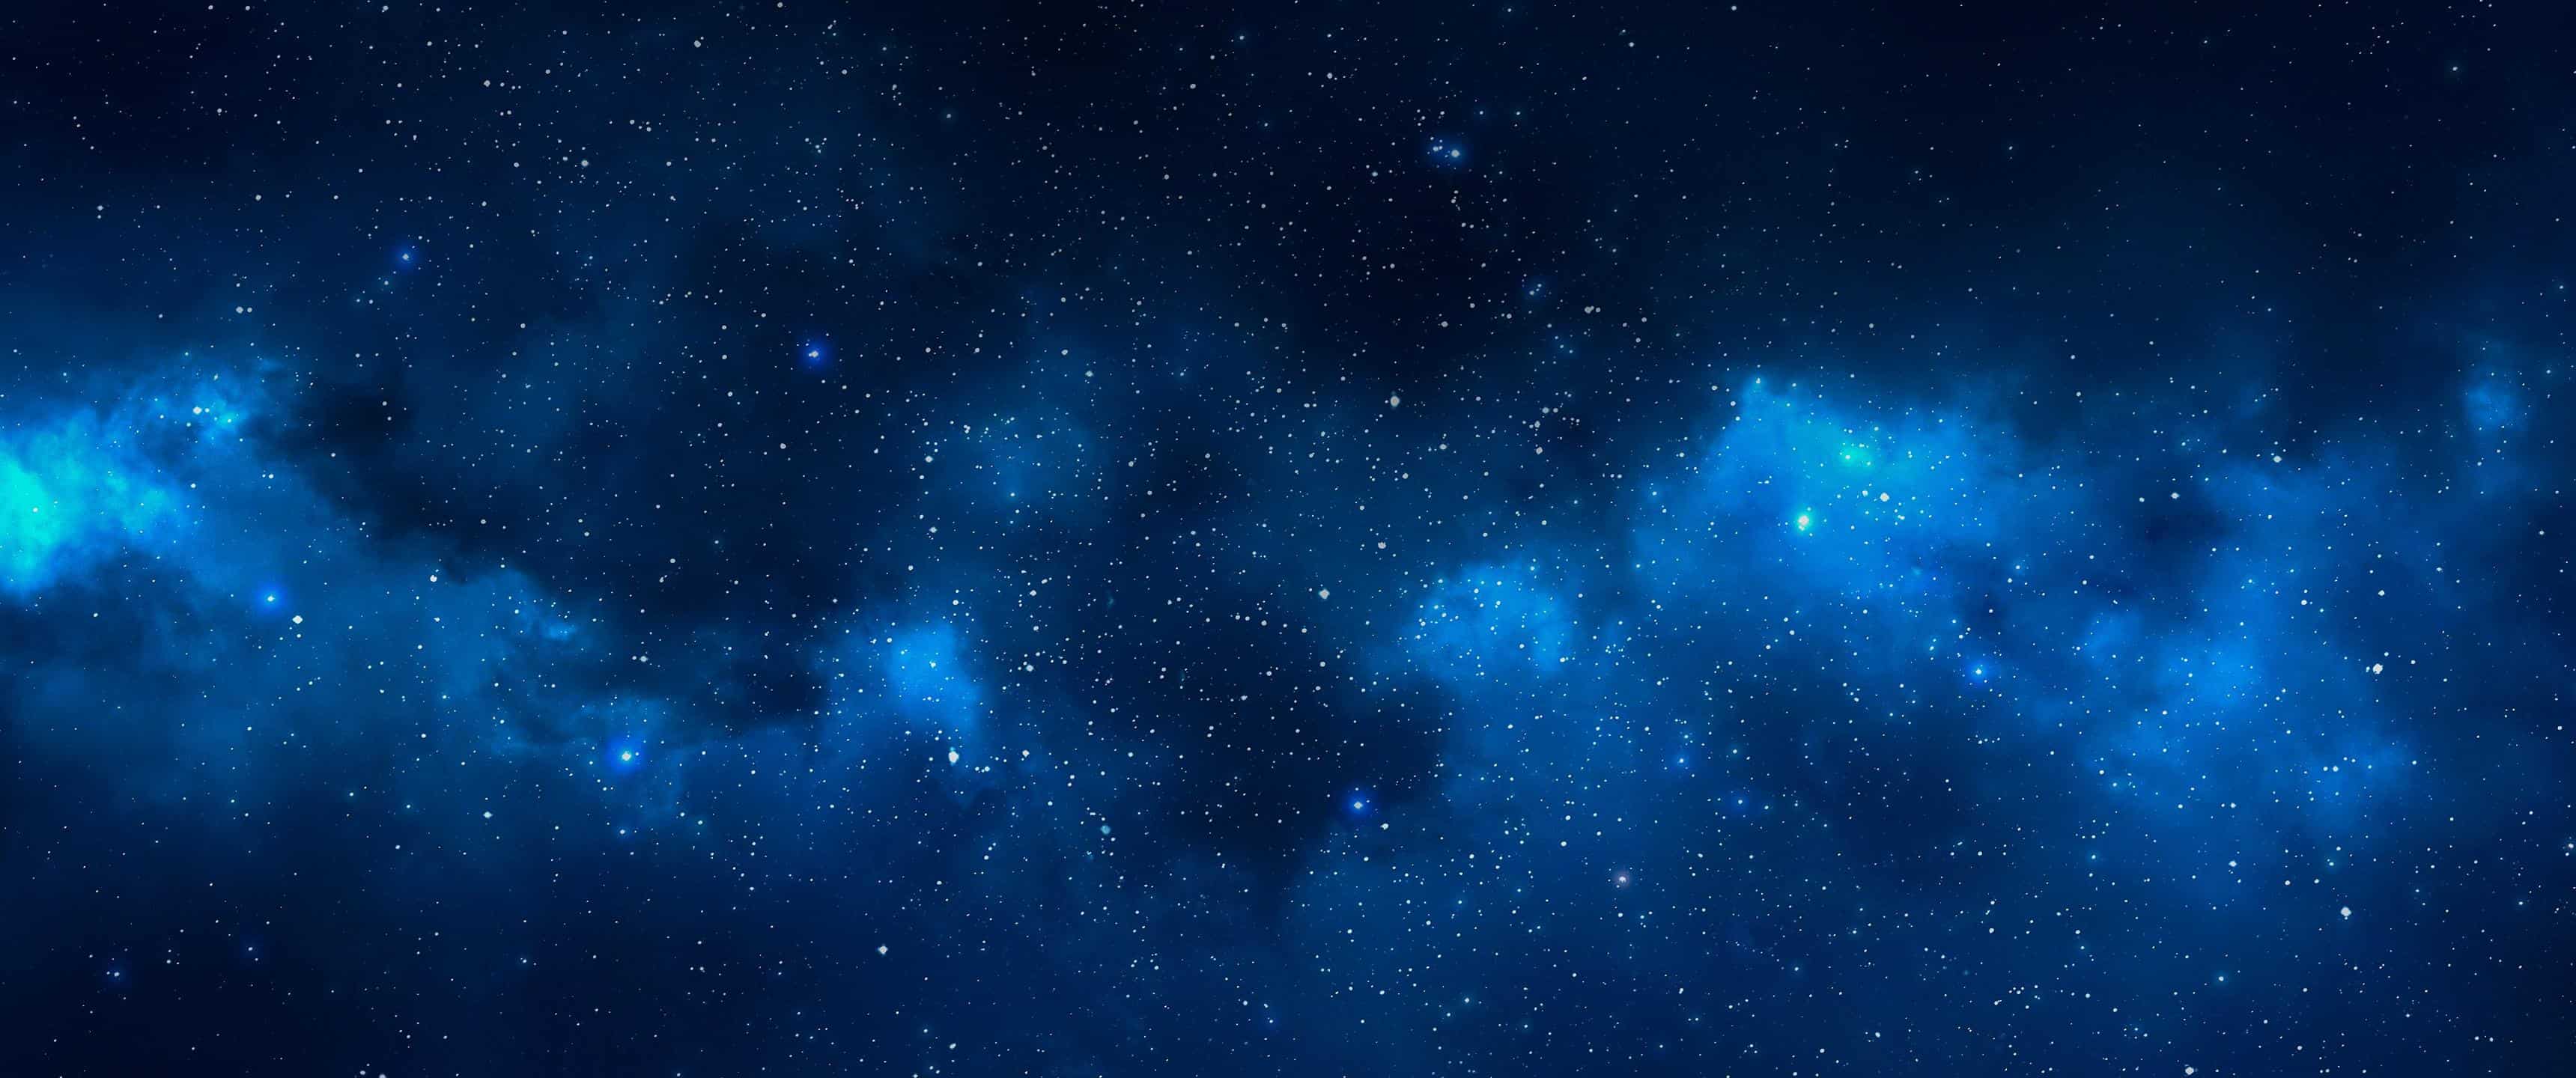 space hd wallpapers widescreen